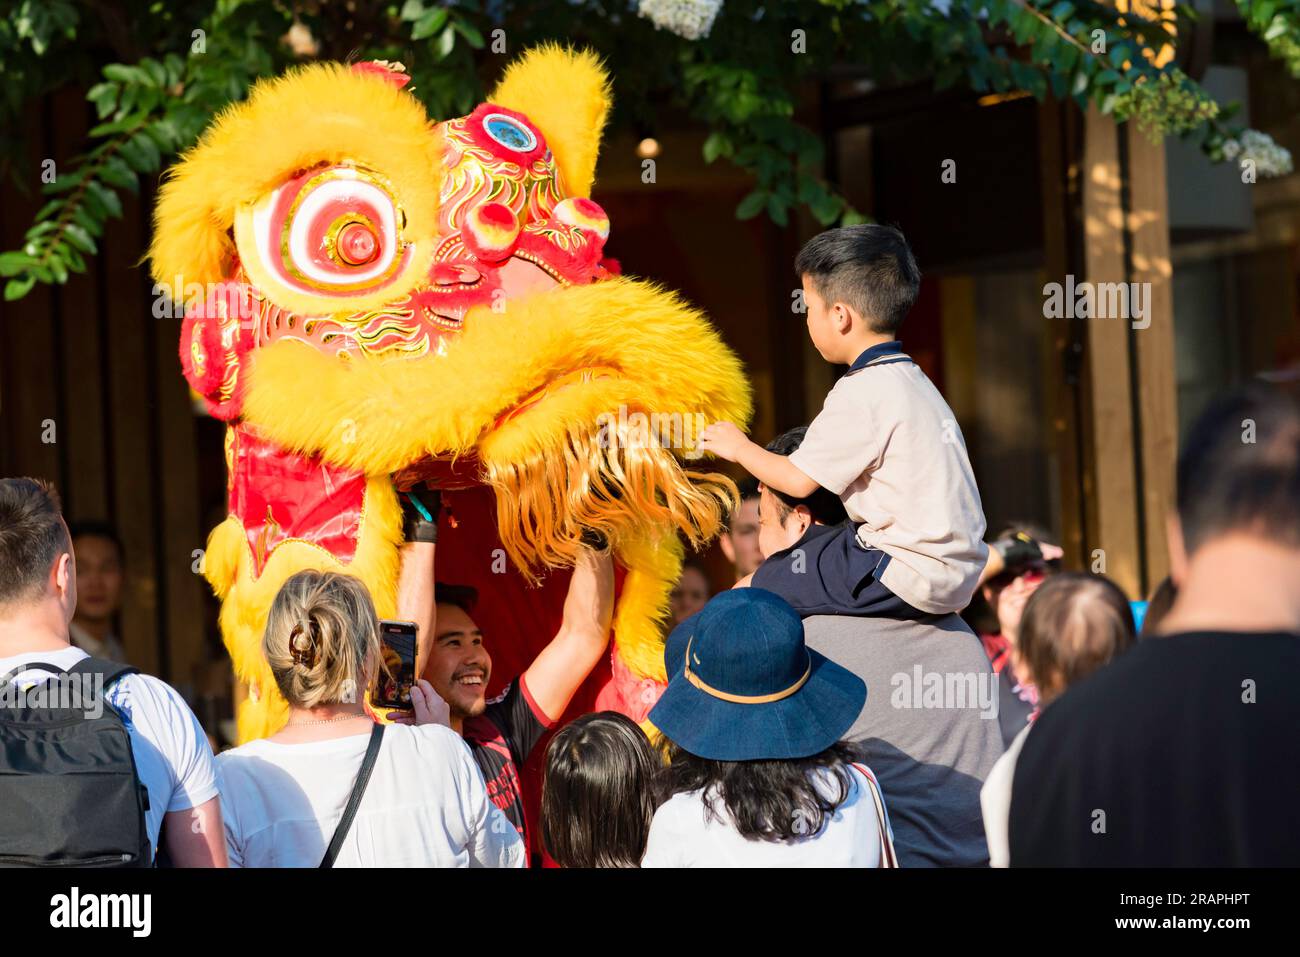 A Chinese Dragon dance performing up close to a young child during Lunar (Chinese) New Year in Sydney's Darling Quarter in Australia Stock Photo